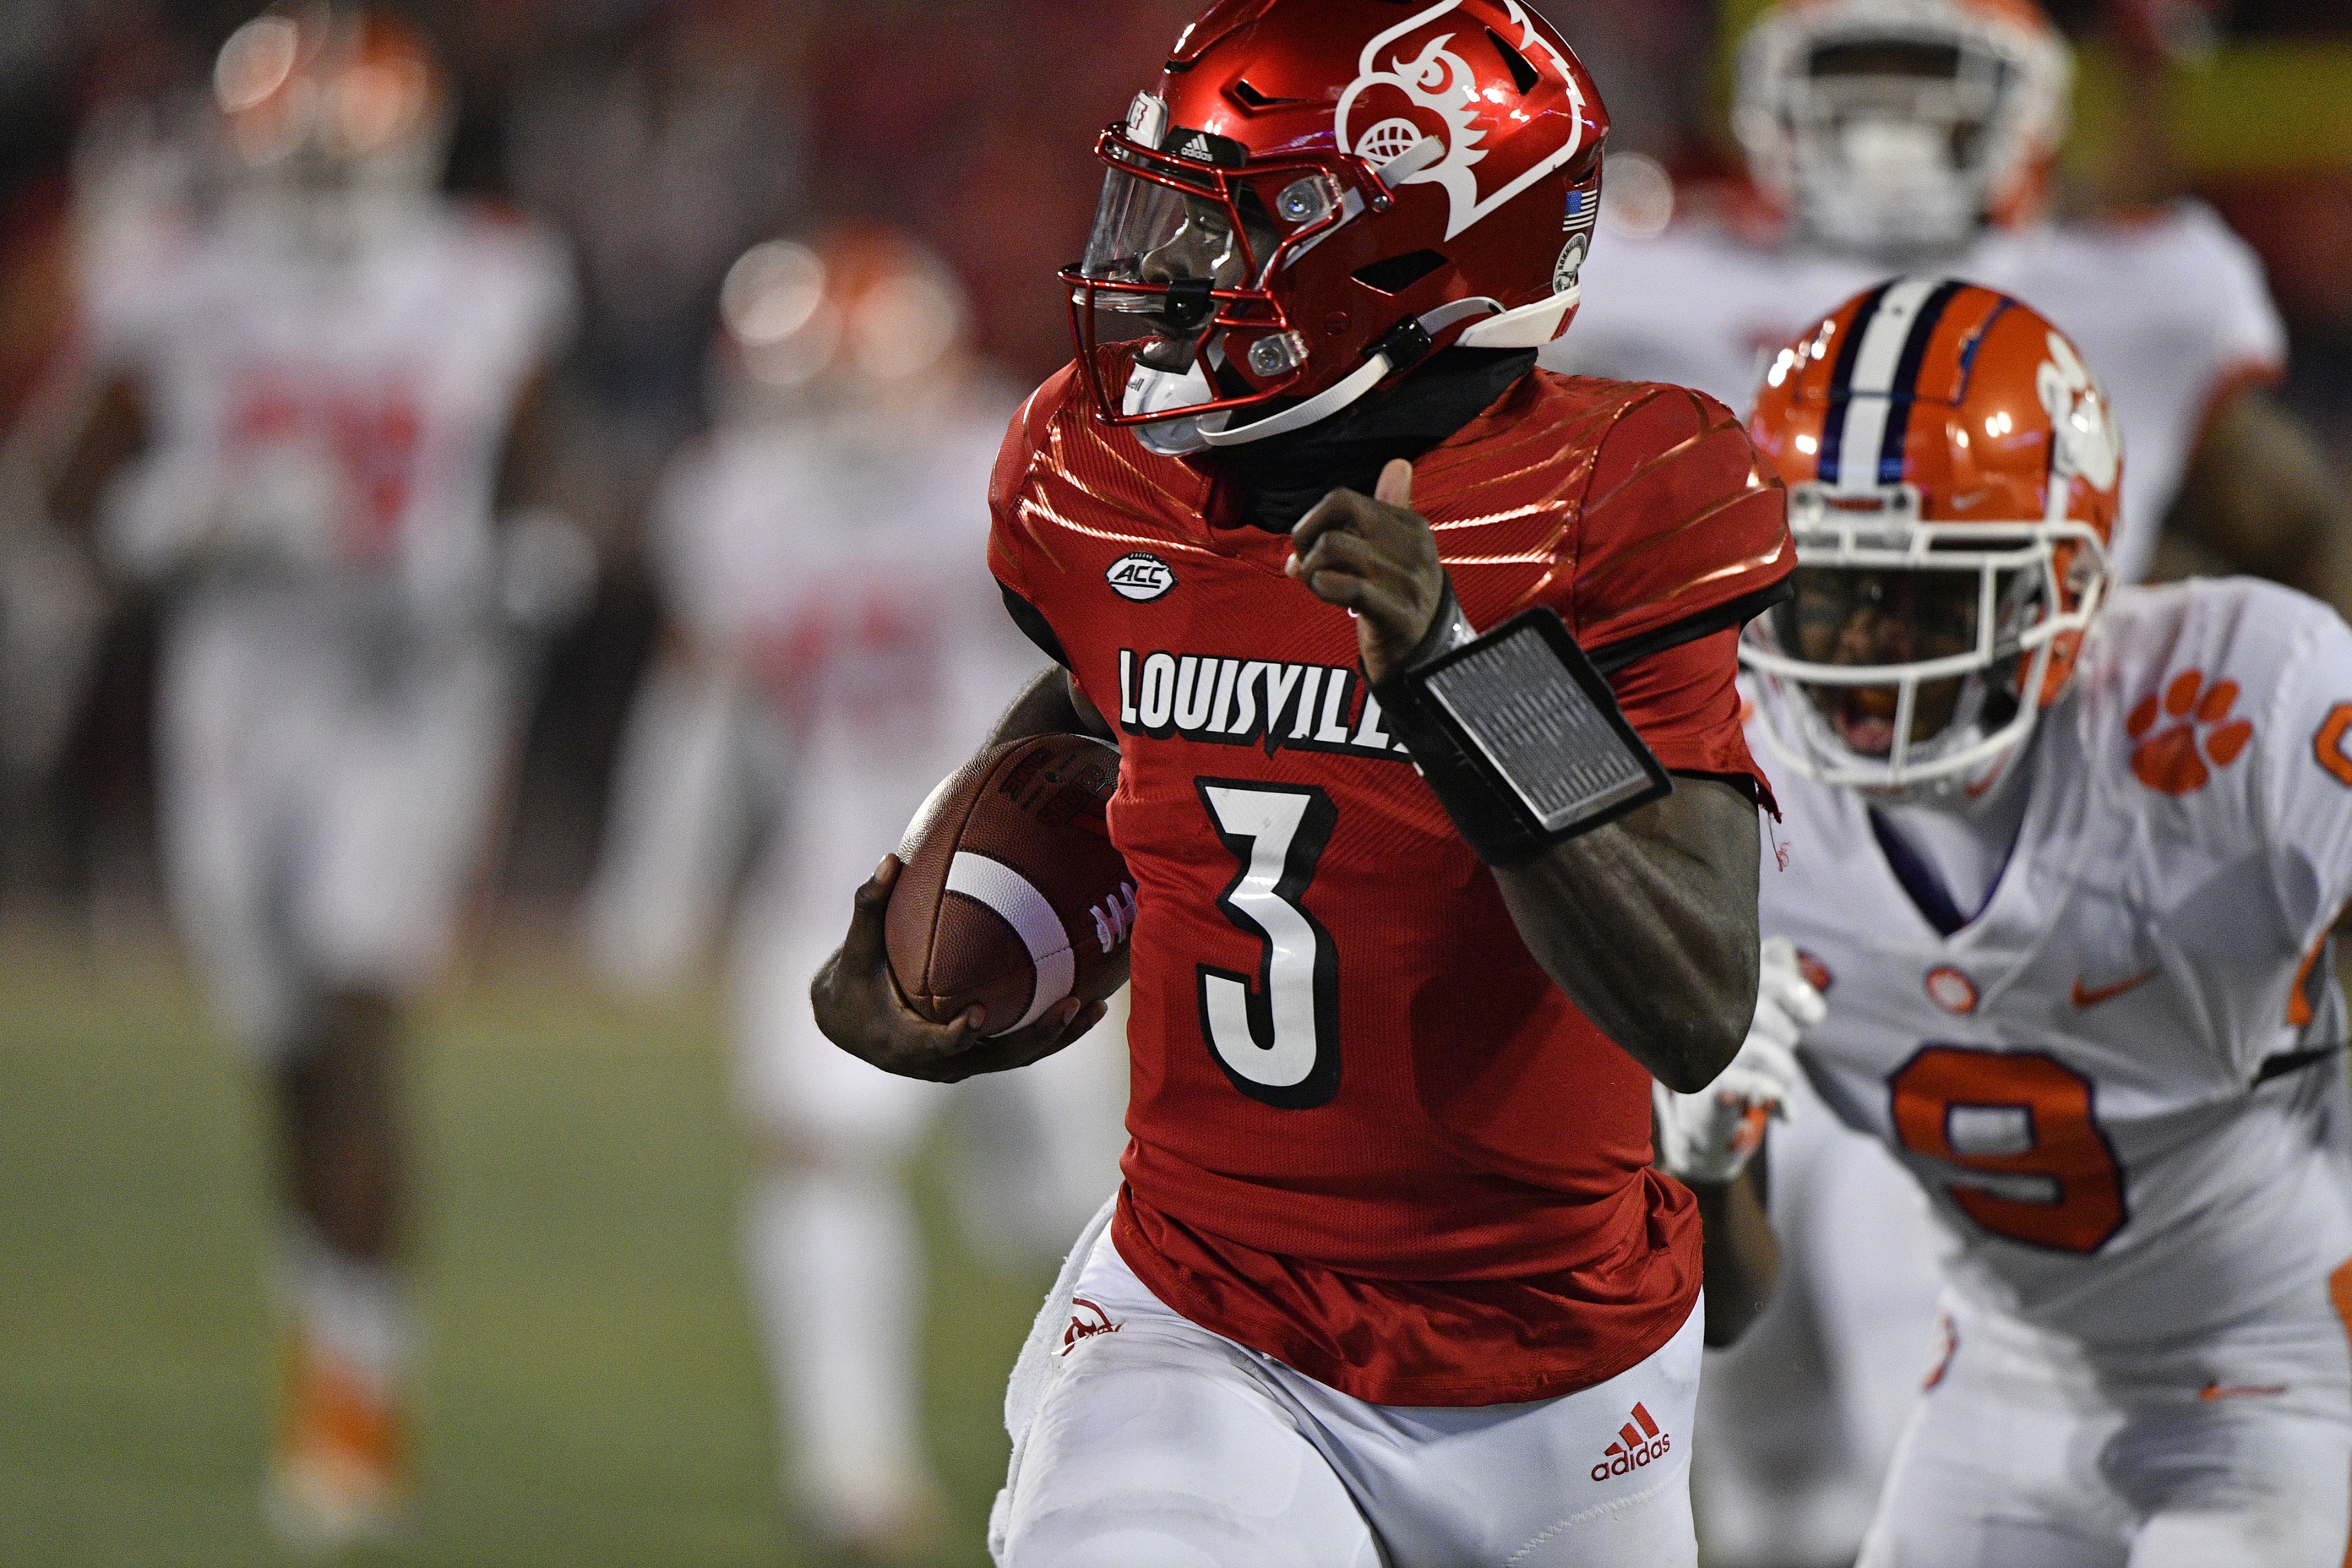 points-of-emphasis-louisville-football-vs-clemson-sports